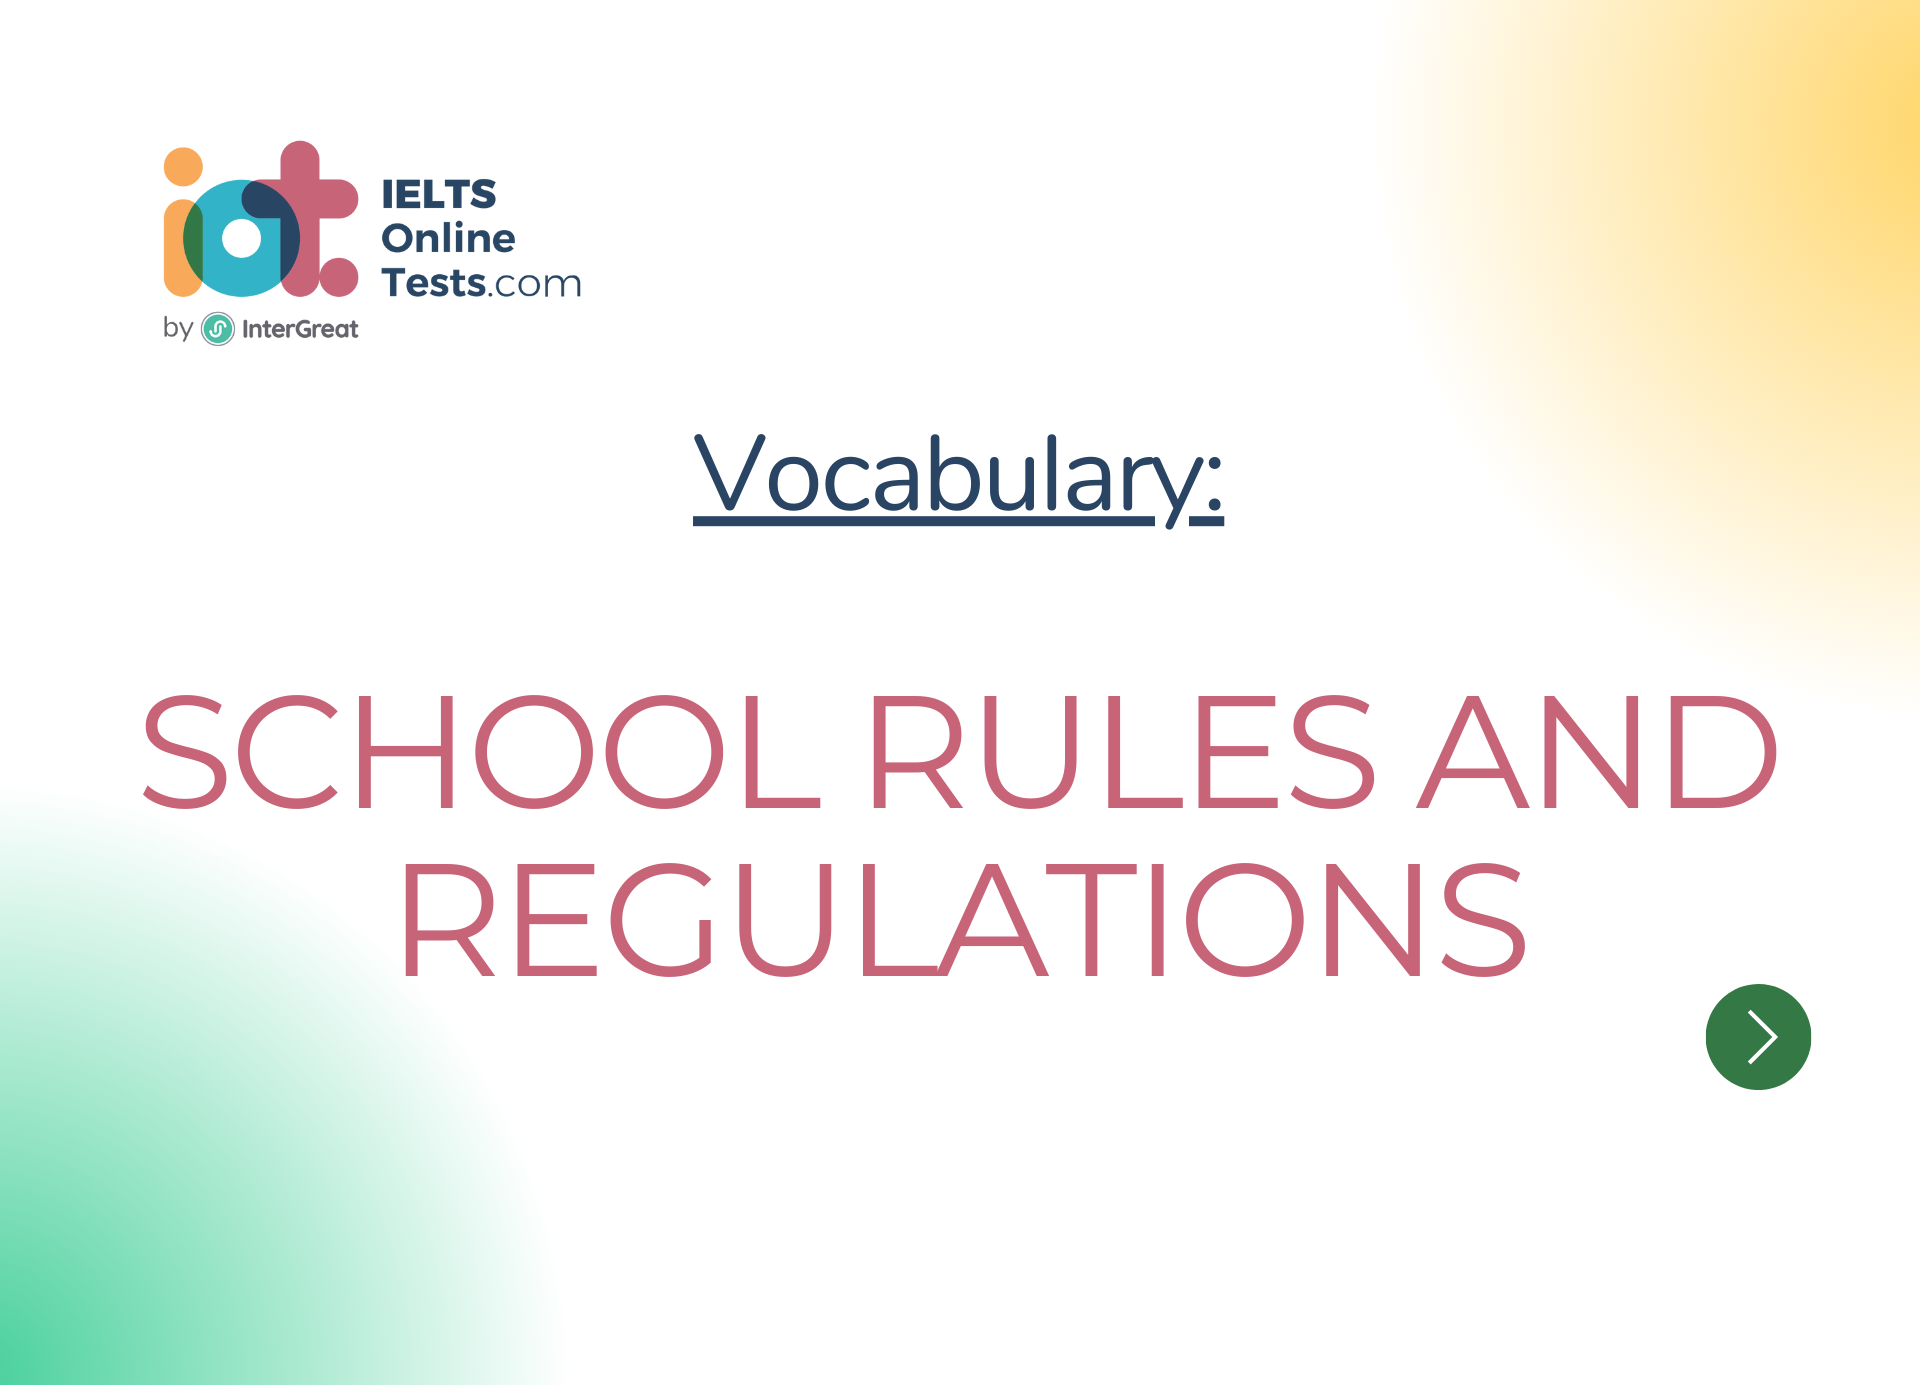 Nội quy trường học (School rules and regulations)